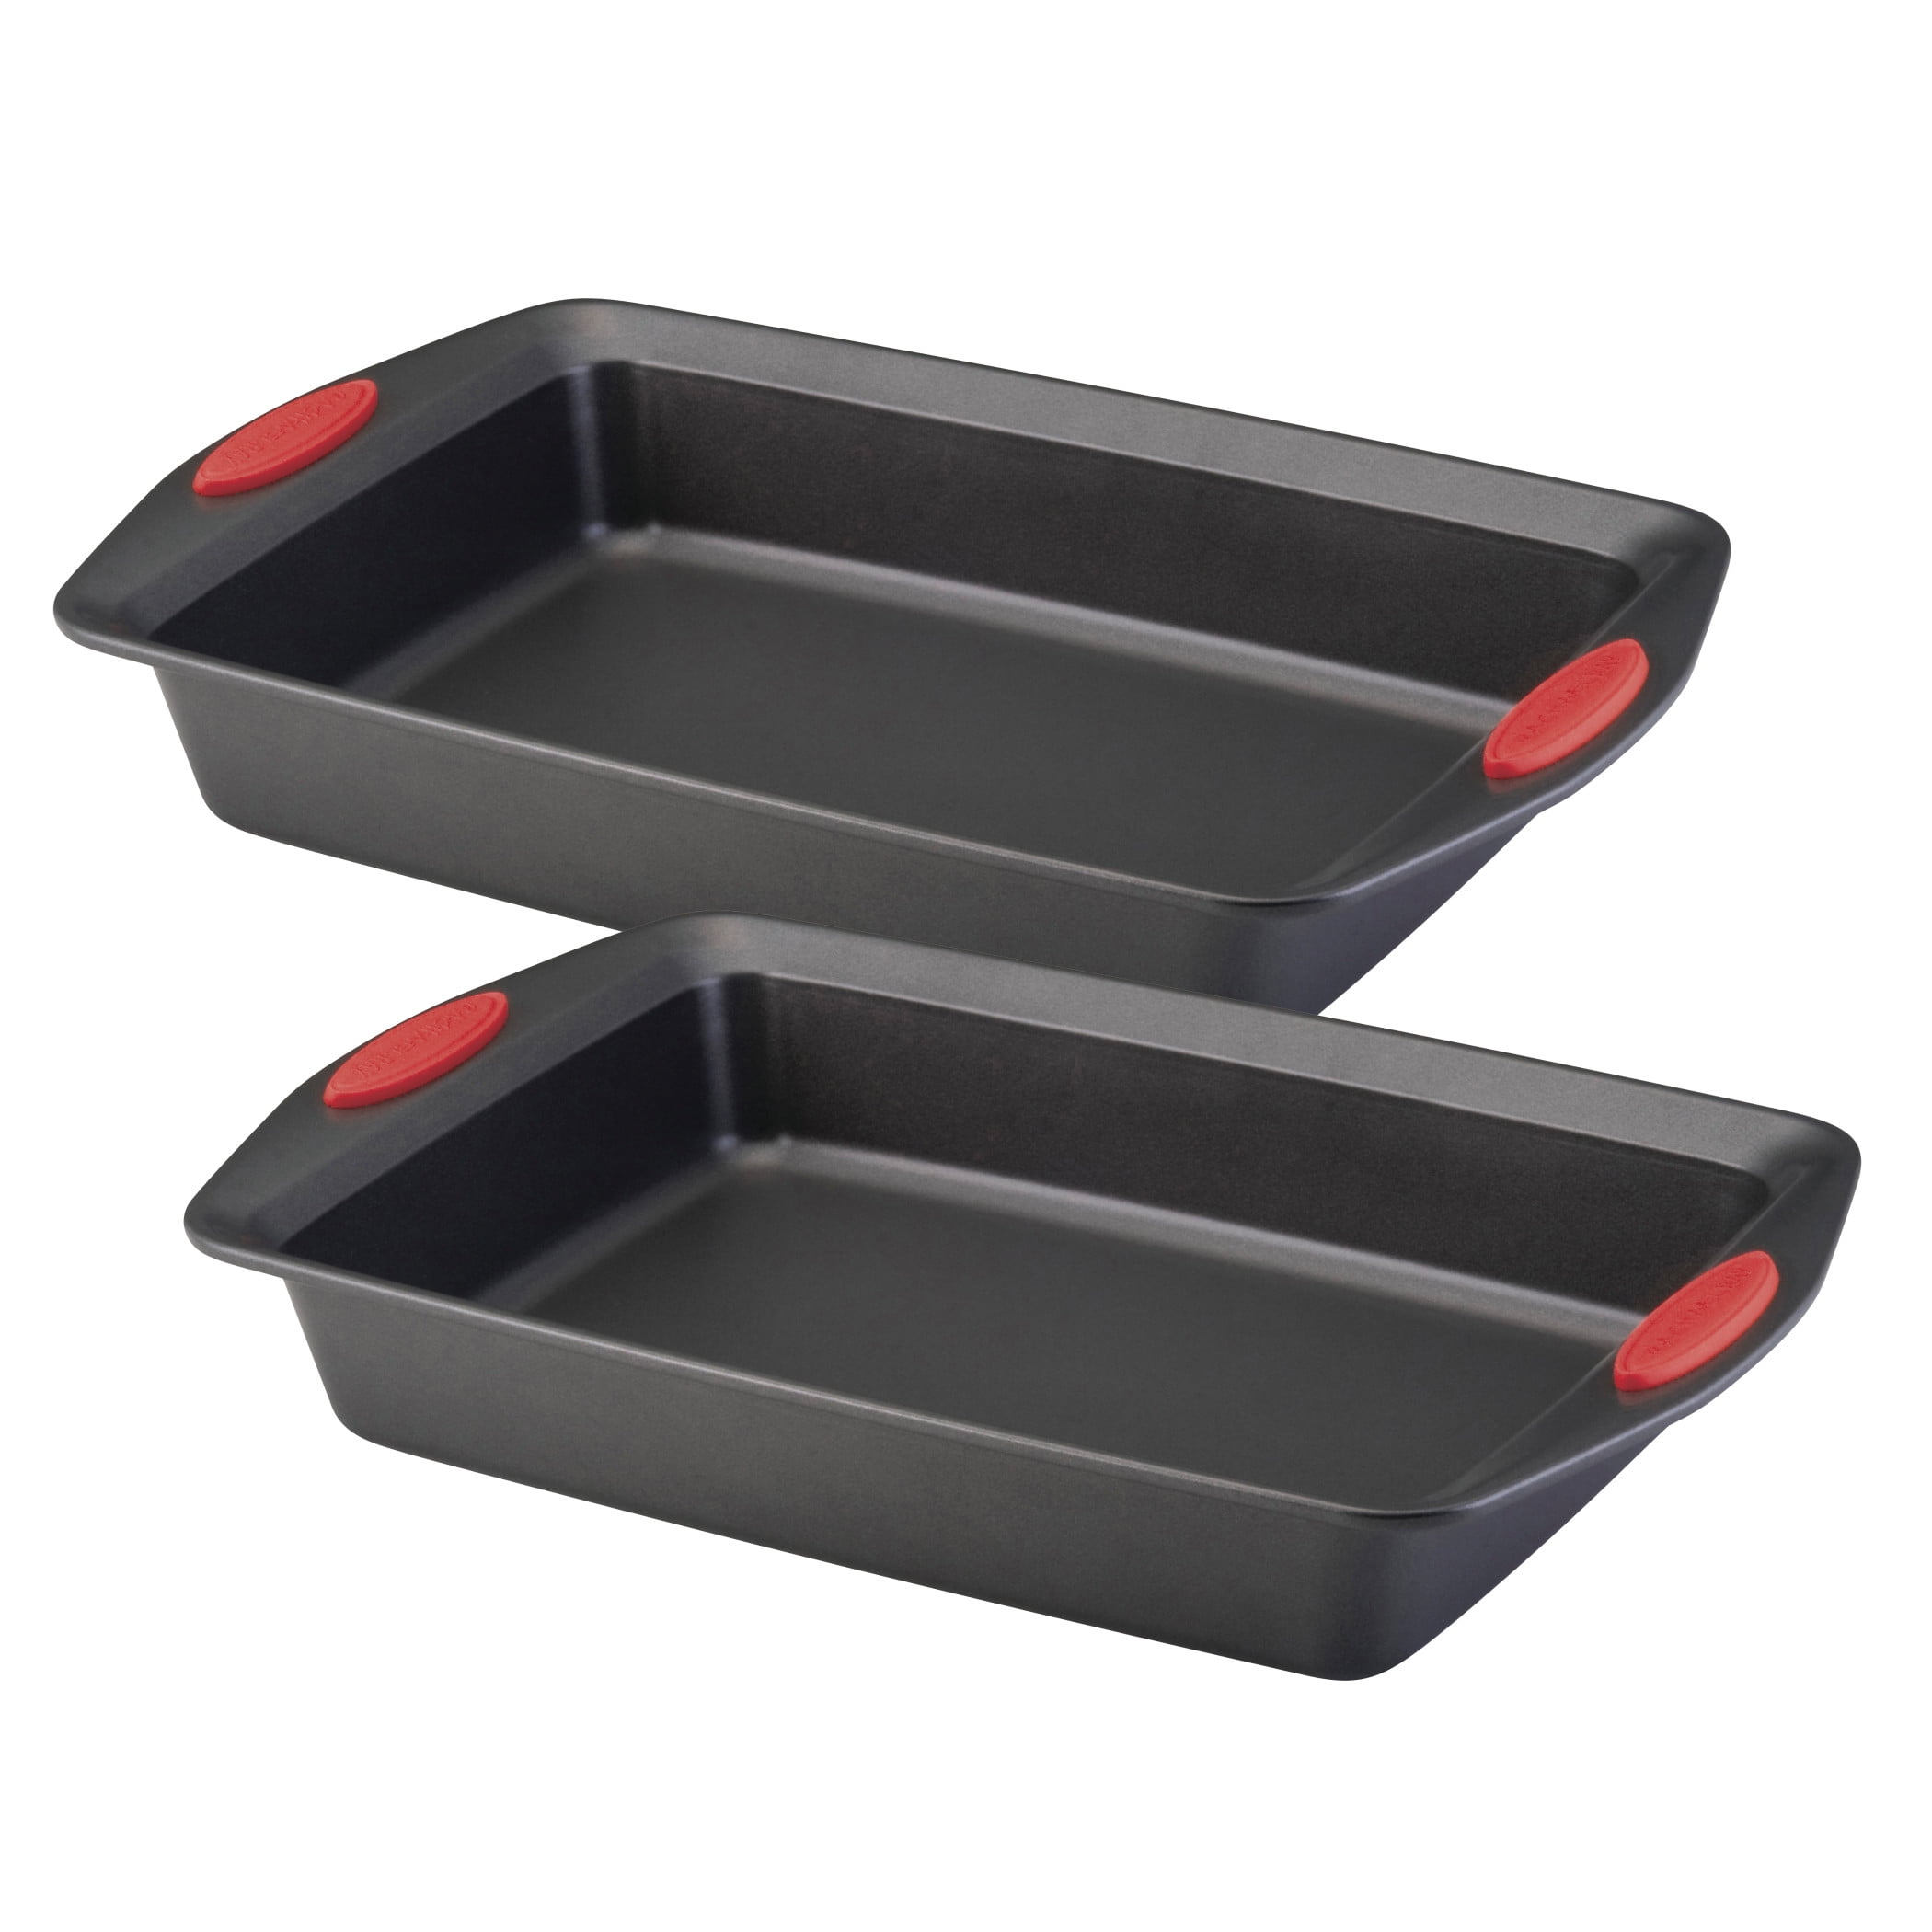 5 Piece 1 Baking Pans and Cake Pans Nonstick Bakeware Set with Grips Includes Nonstick Bread Pan Gray with Orange Grips